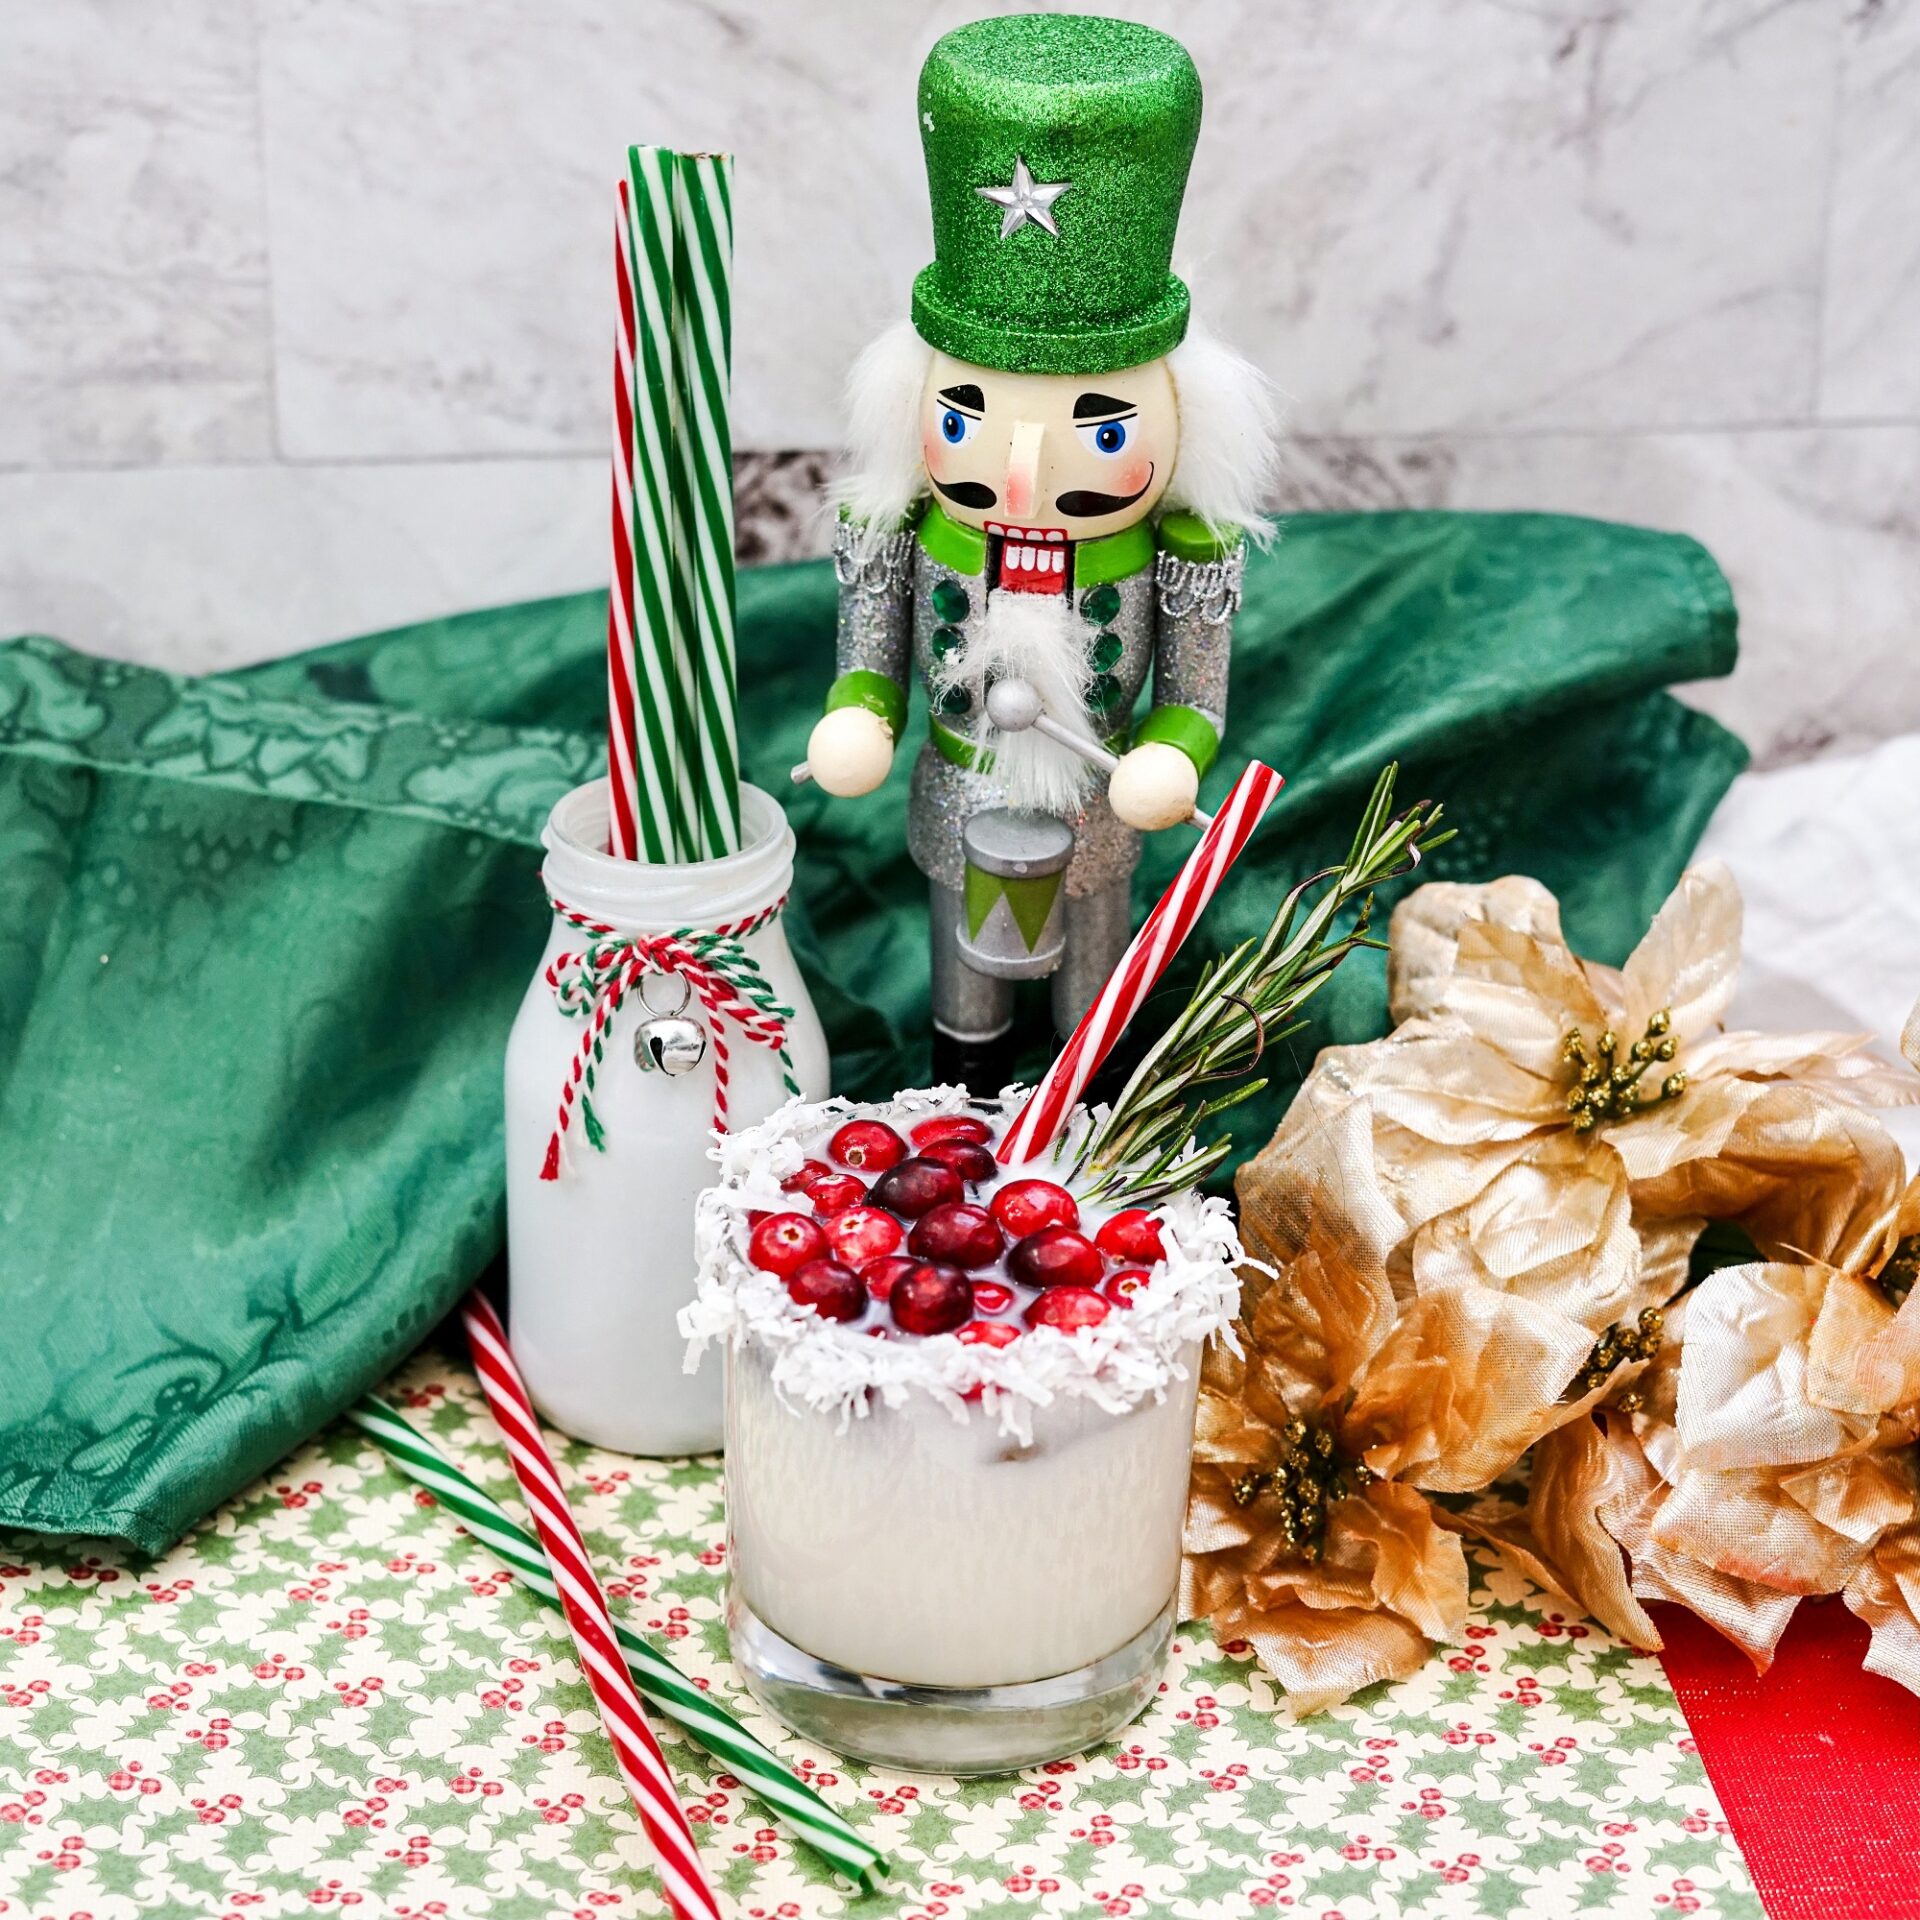 Rum coconut milk cocktail on a counter with ingredients and festive decor.